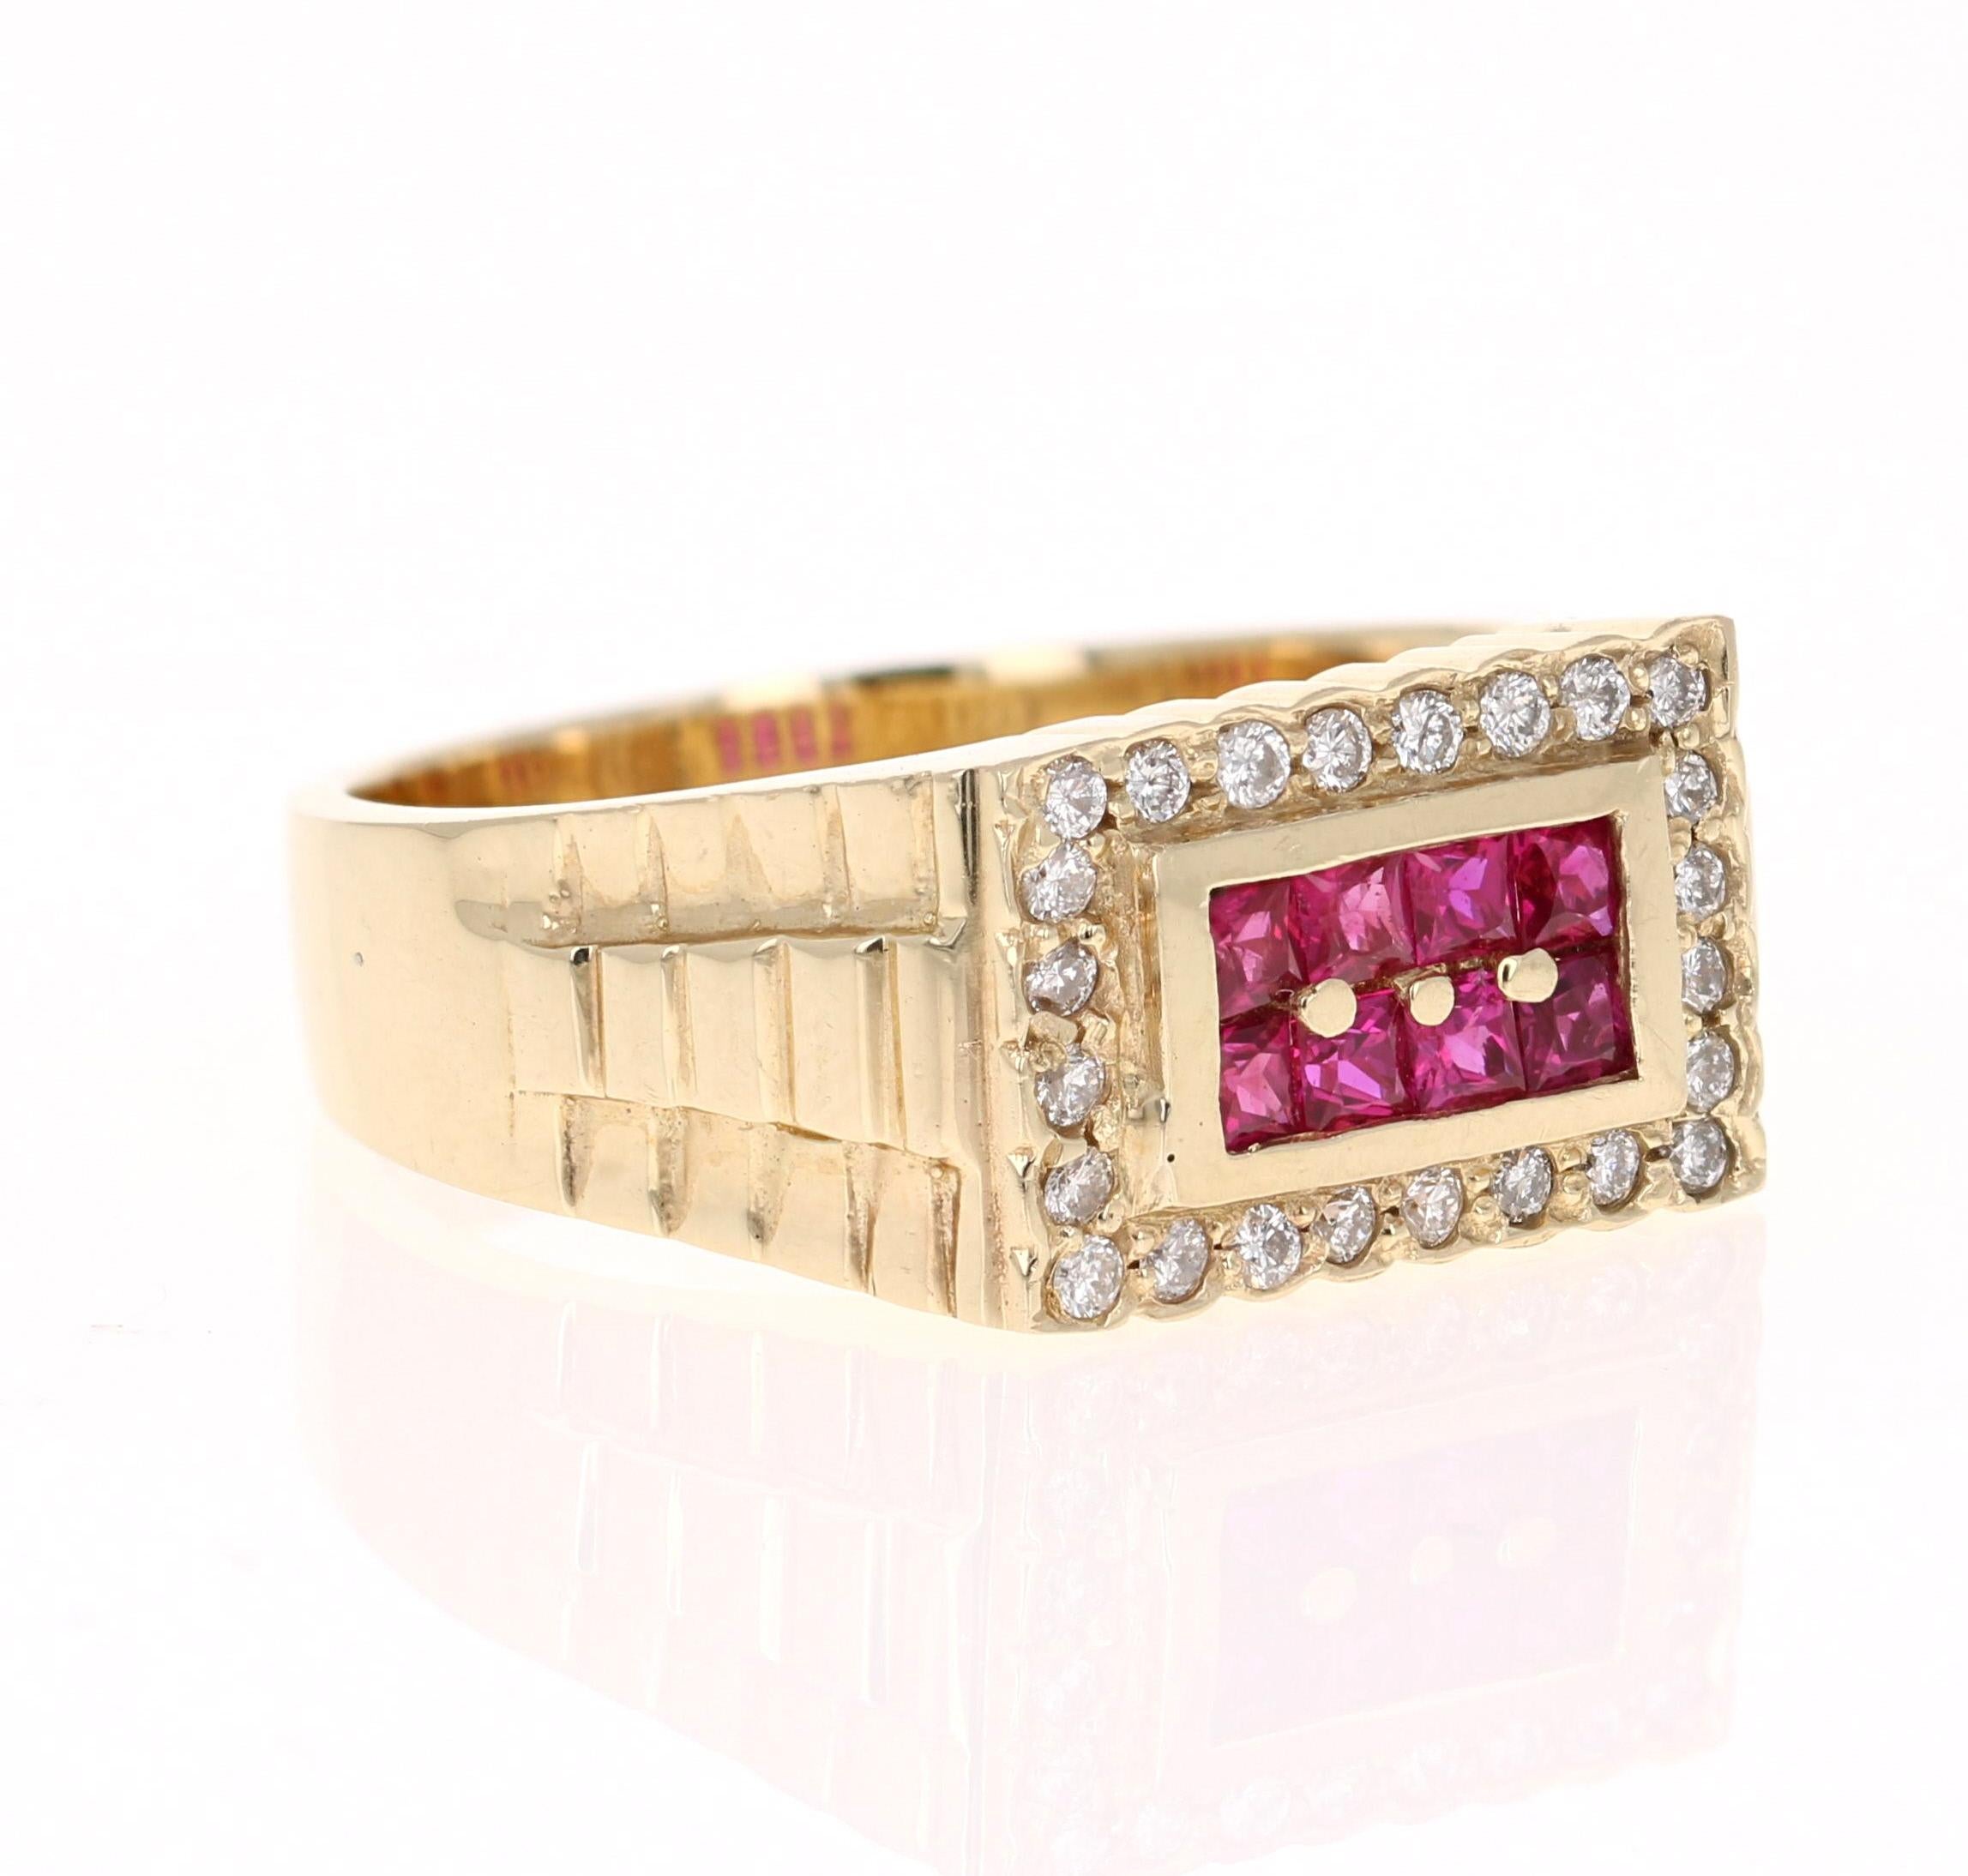 We also carry a unique Men's Collection of Wedding Bands & Rings! 

This amazing piece is set with 8 Rubies that weigh 0.62 Carats and 24 Round Cut Diamonds that weigh 0.29 Carats. The Total Carat Weight of the ring is 0.91 Carats. 

It is